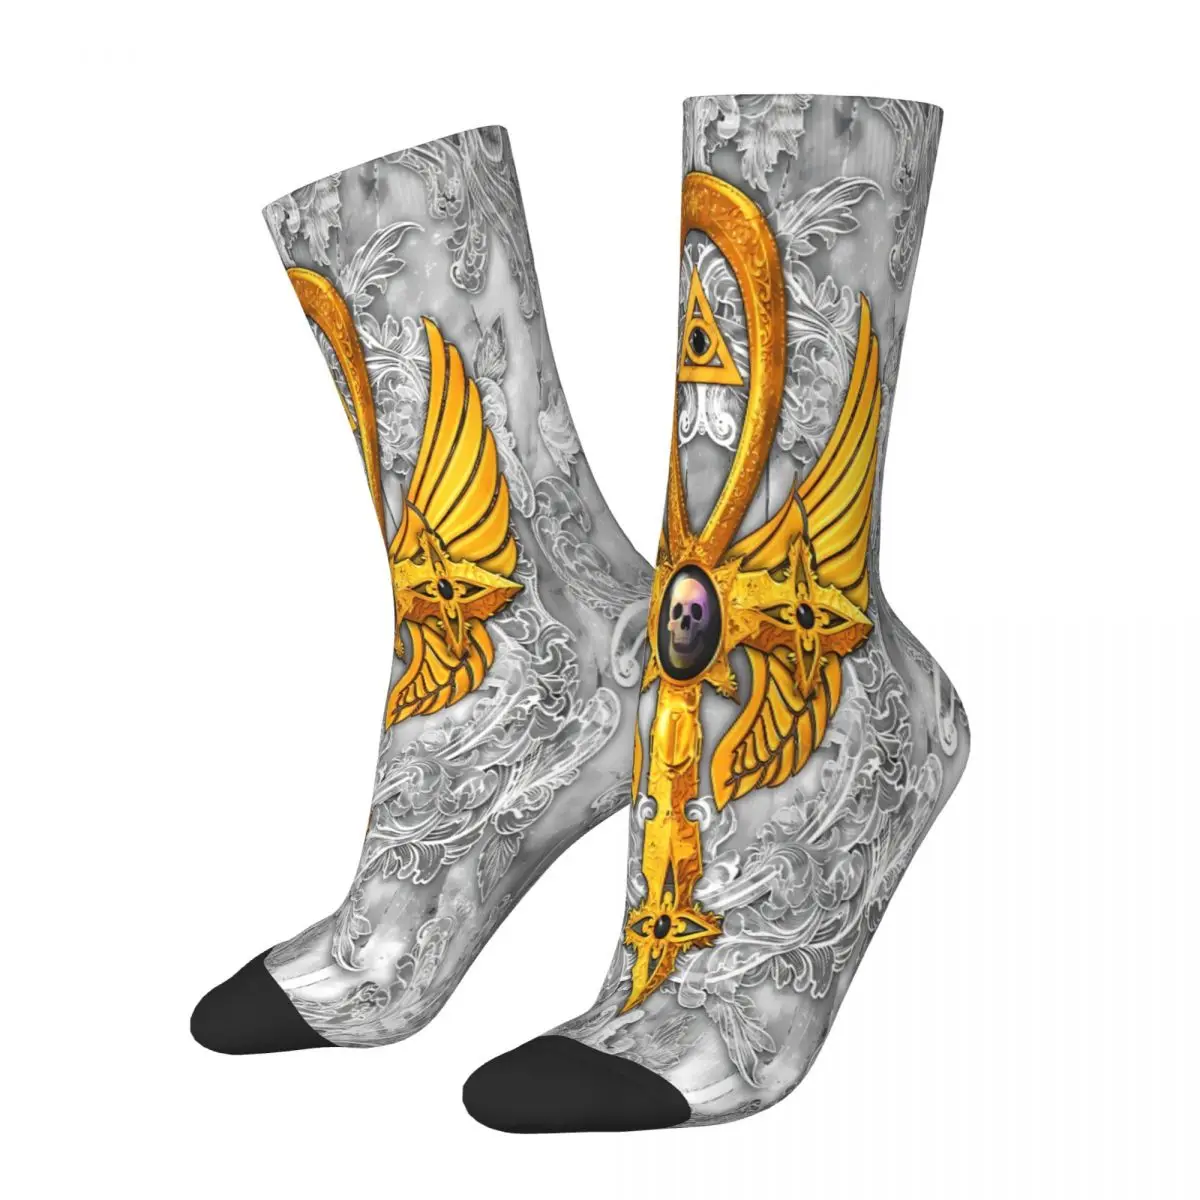 

White And Gold Gothic Ankh Steampunk Socks Male Mens Women Spring Stockings Printed